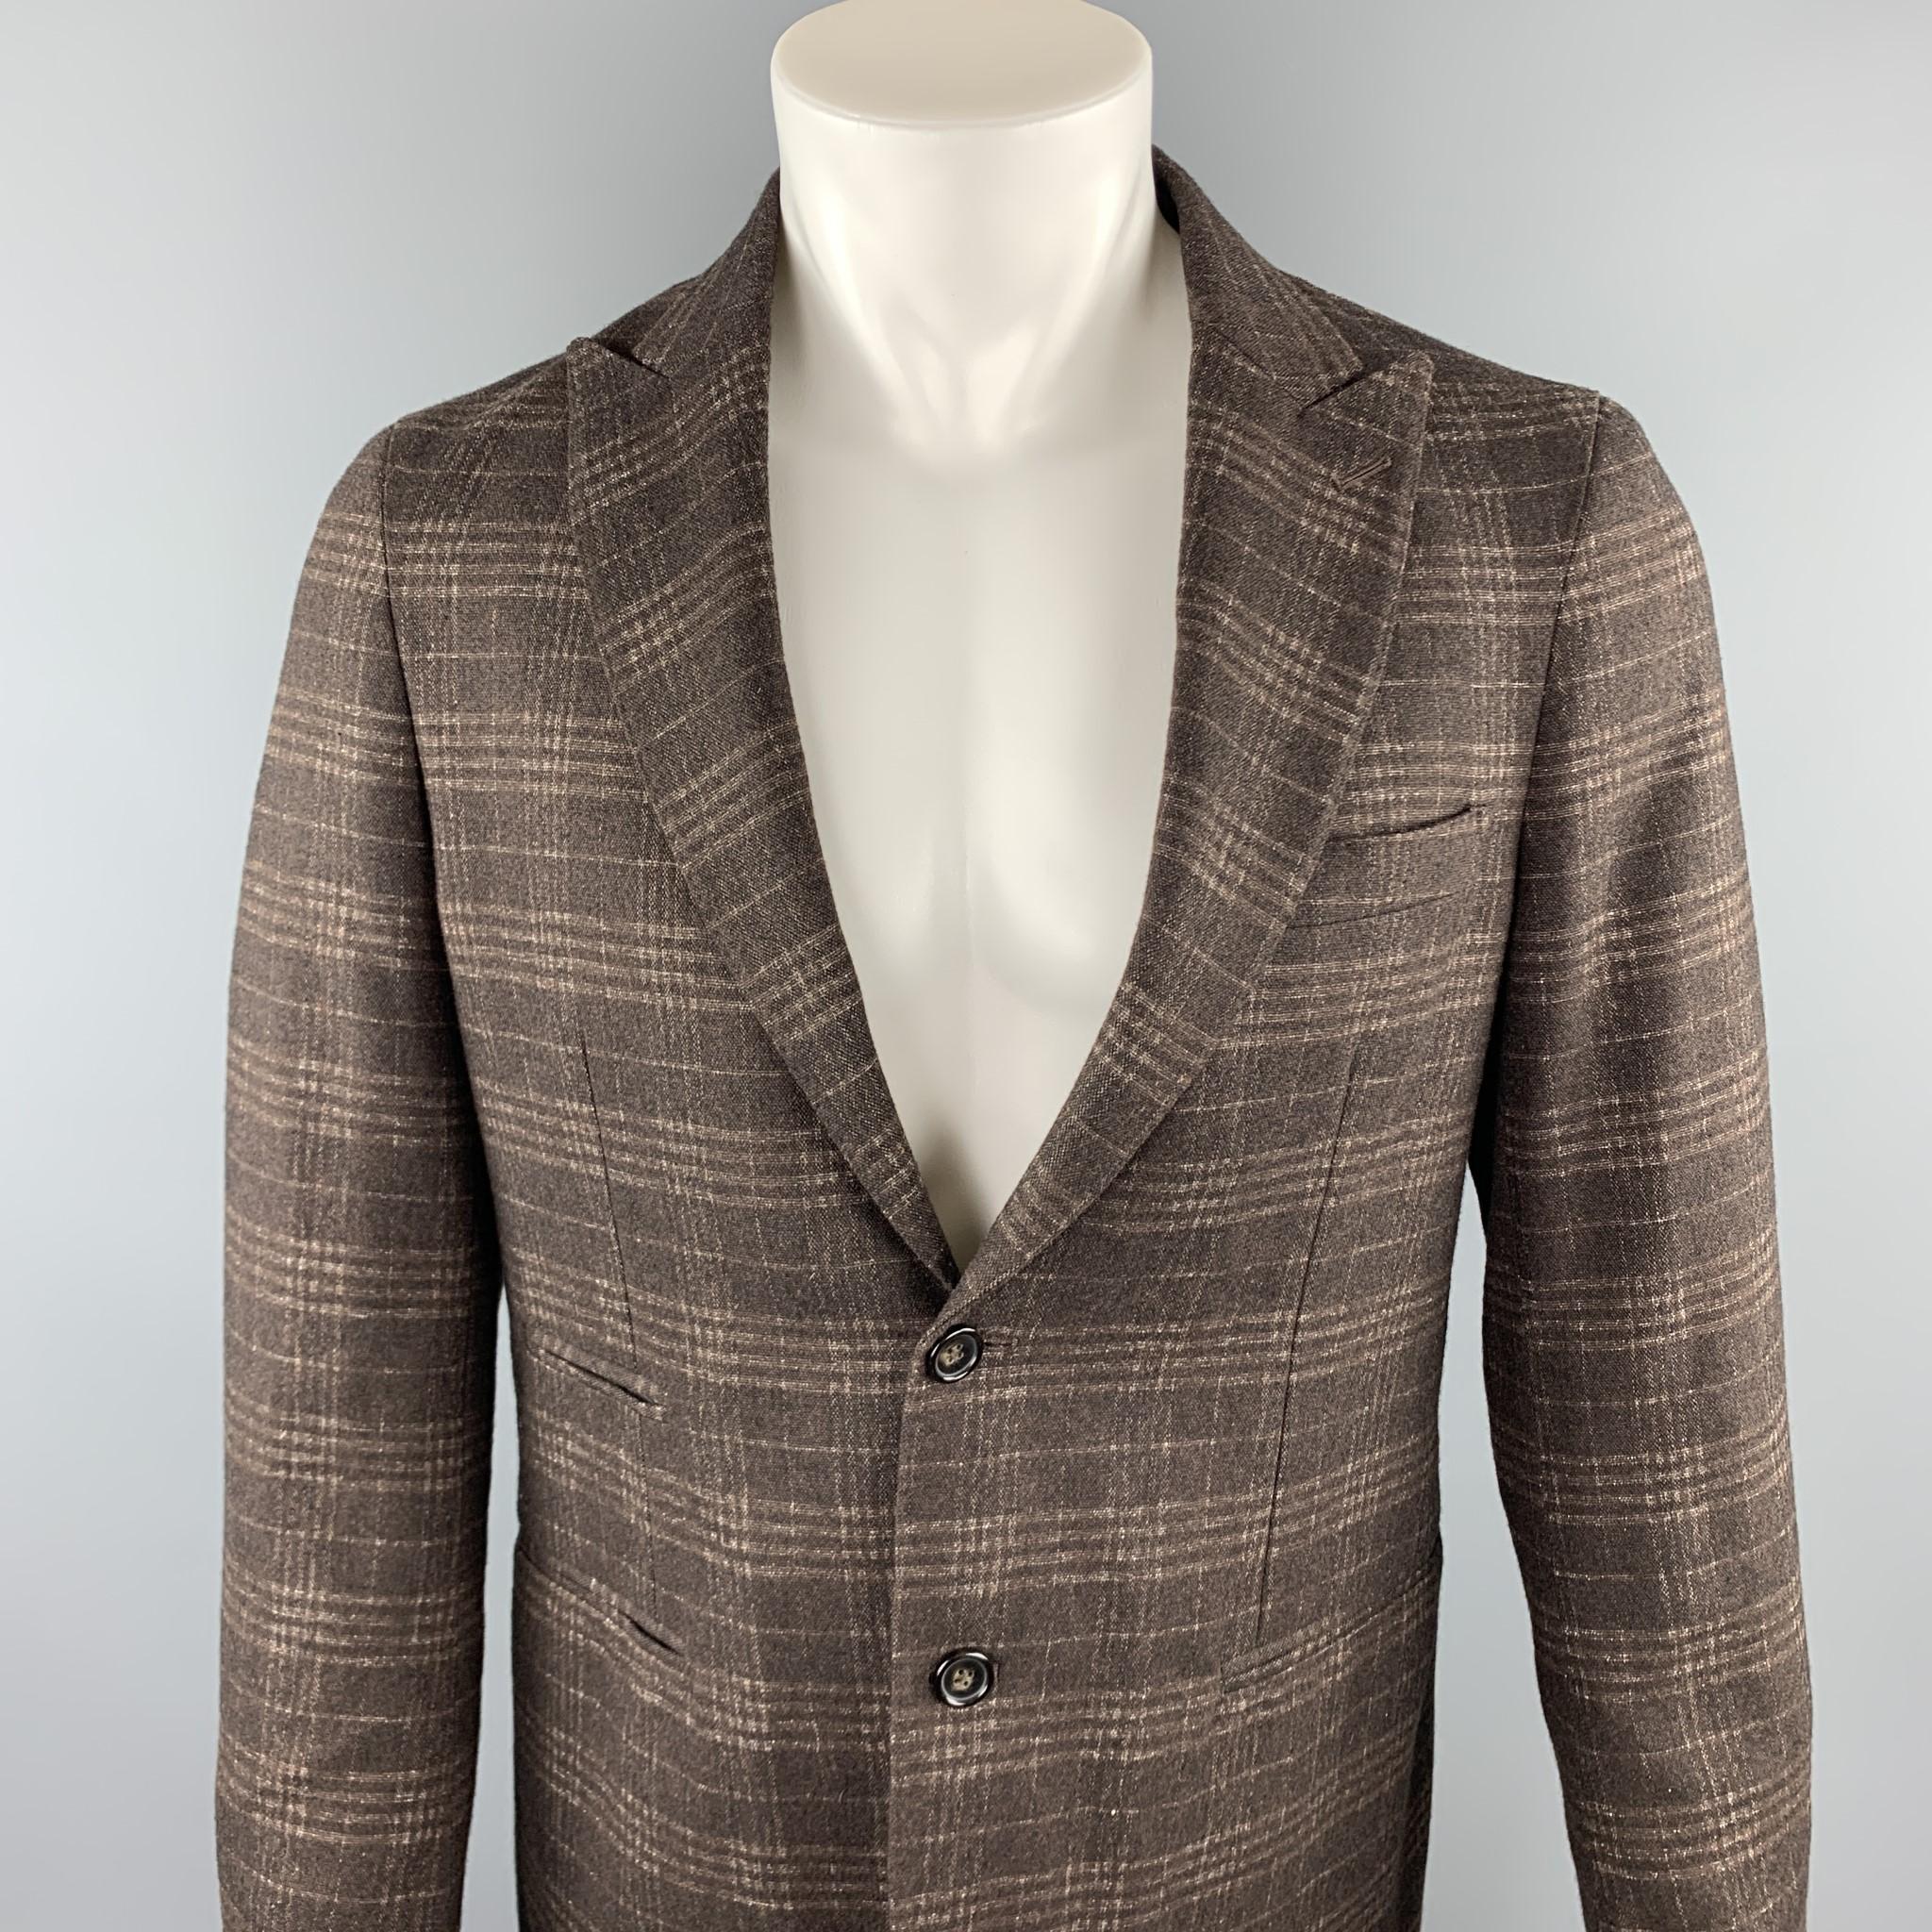 EREDI PISANO sport coat comes in a brown plaid wool blend featuring a peak lapel style, slit pockets, and a two button closure. Made in Italy.

Excellent Pre-Owned Condition.
Marked: IT 50

Measurements:

Shoulder: 16.5 in. 
Chest: 40 in. 
Sleeve: